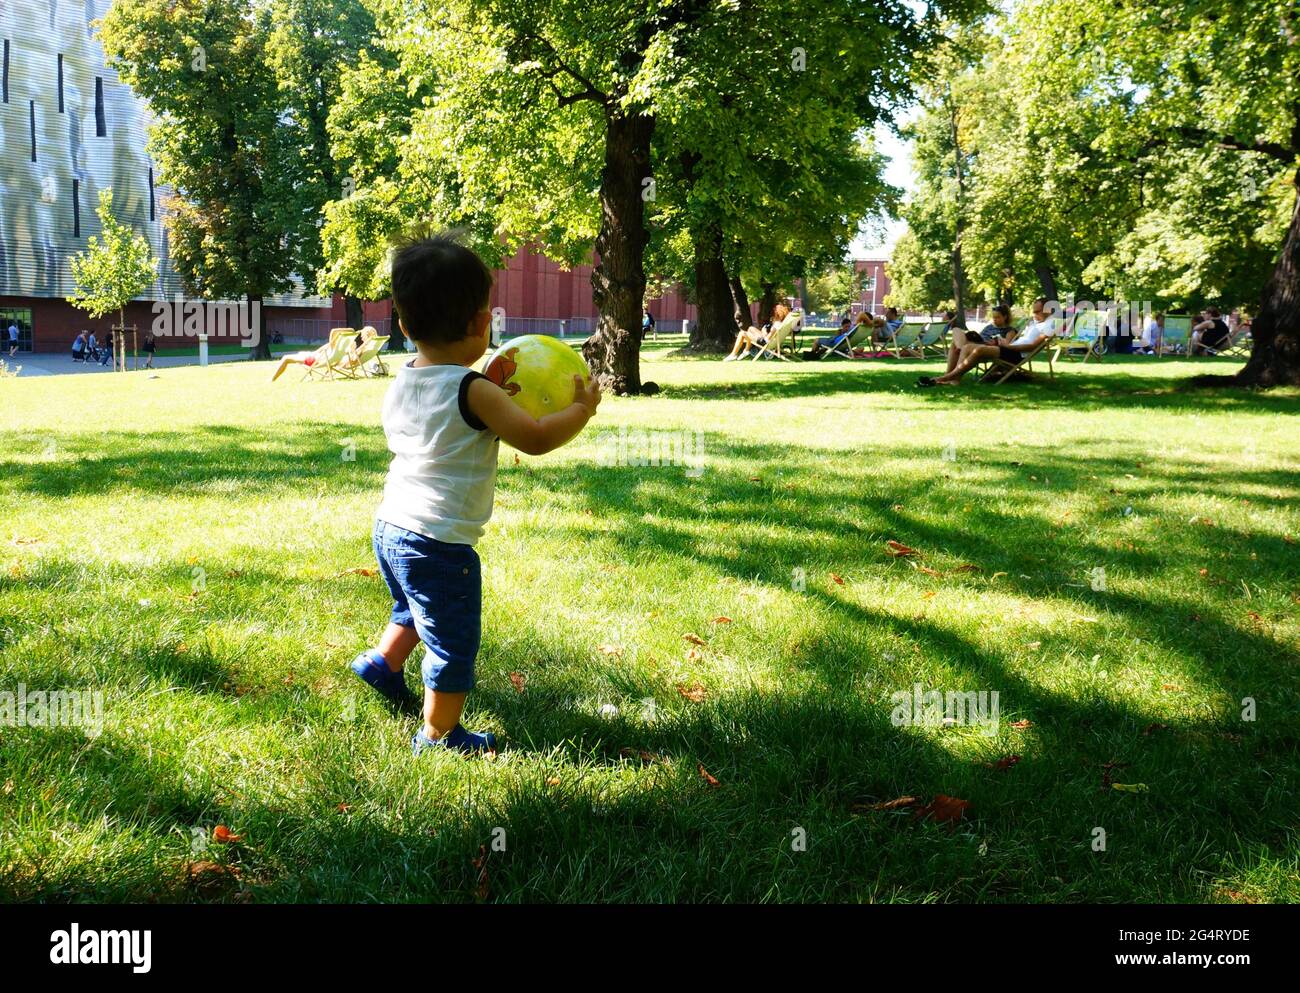 POZNAN, POLAND - Oct 20, 2015: Young toddler boy playing with a ball on green grass at a park. Stock Photo